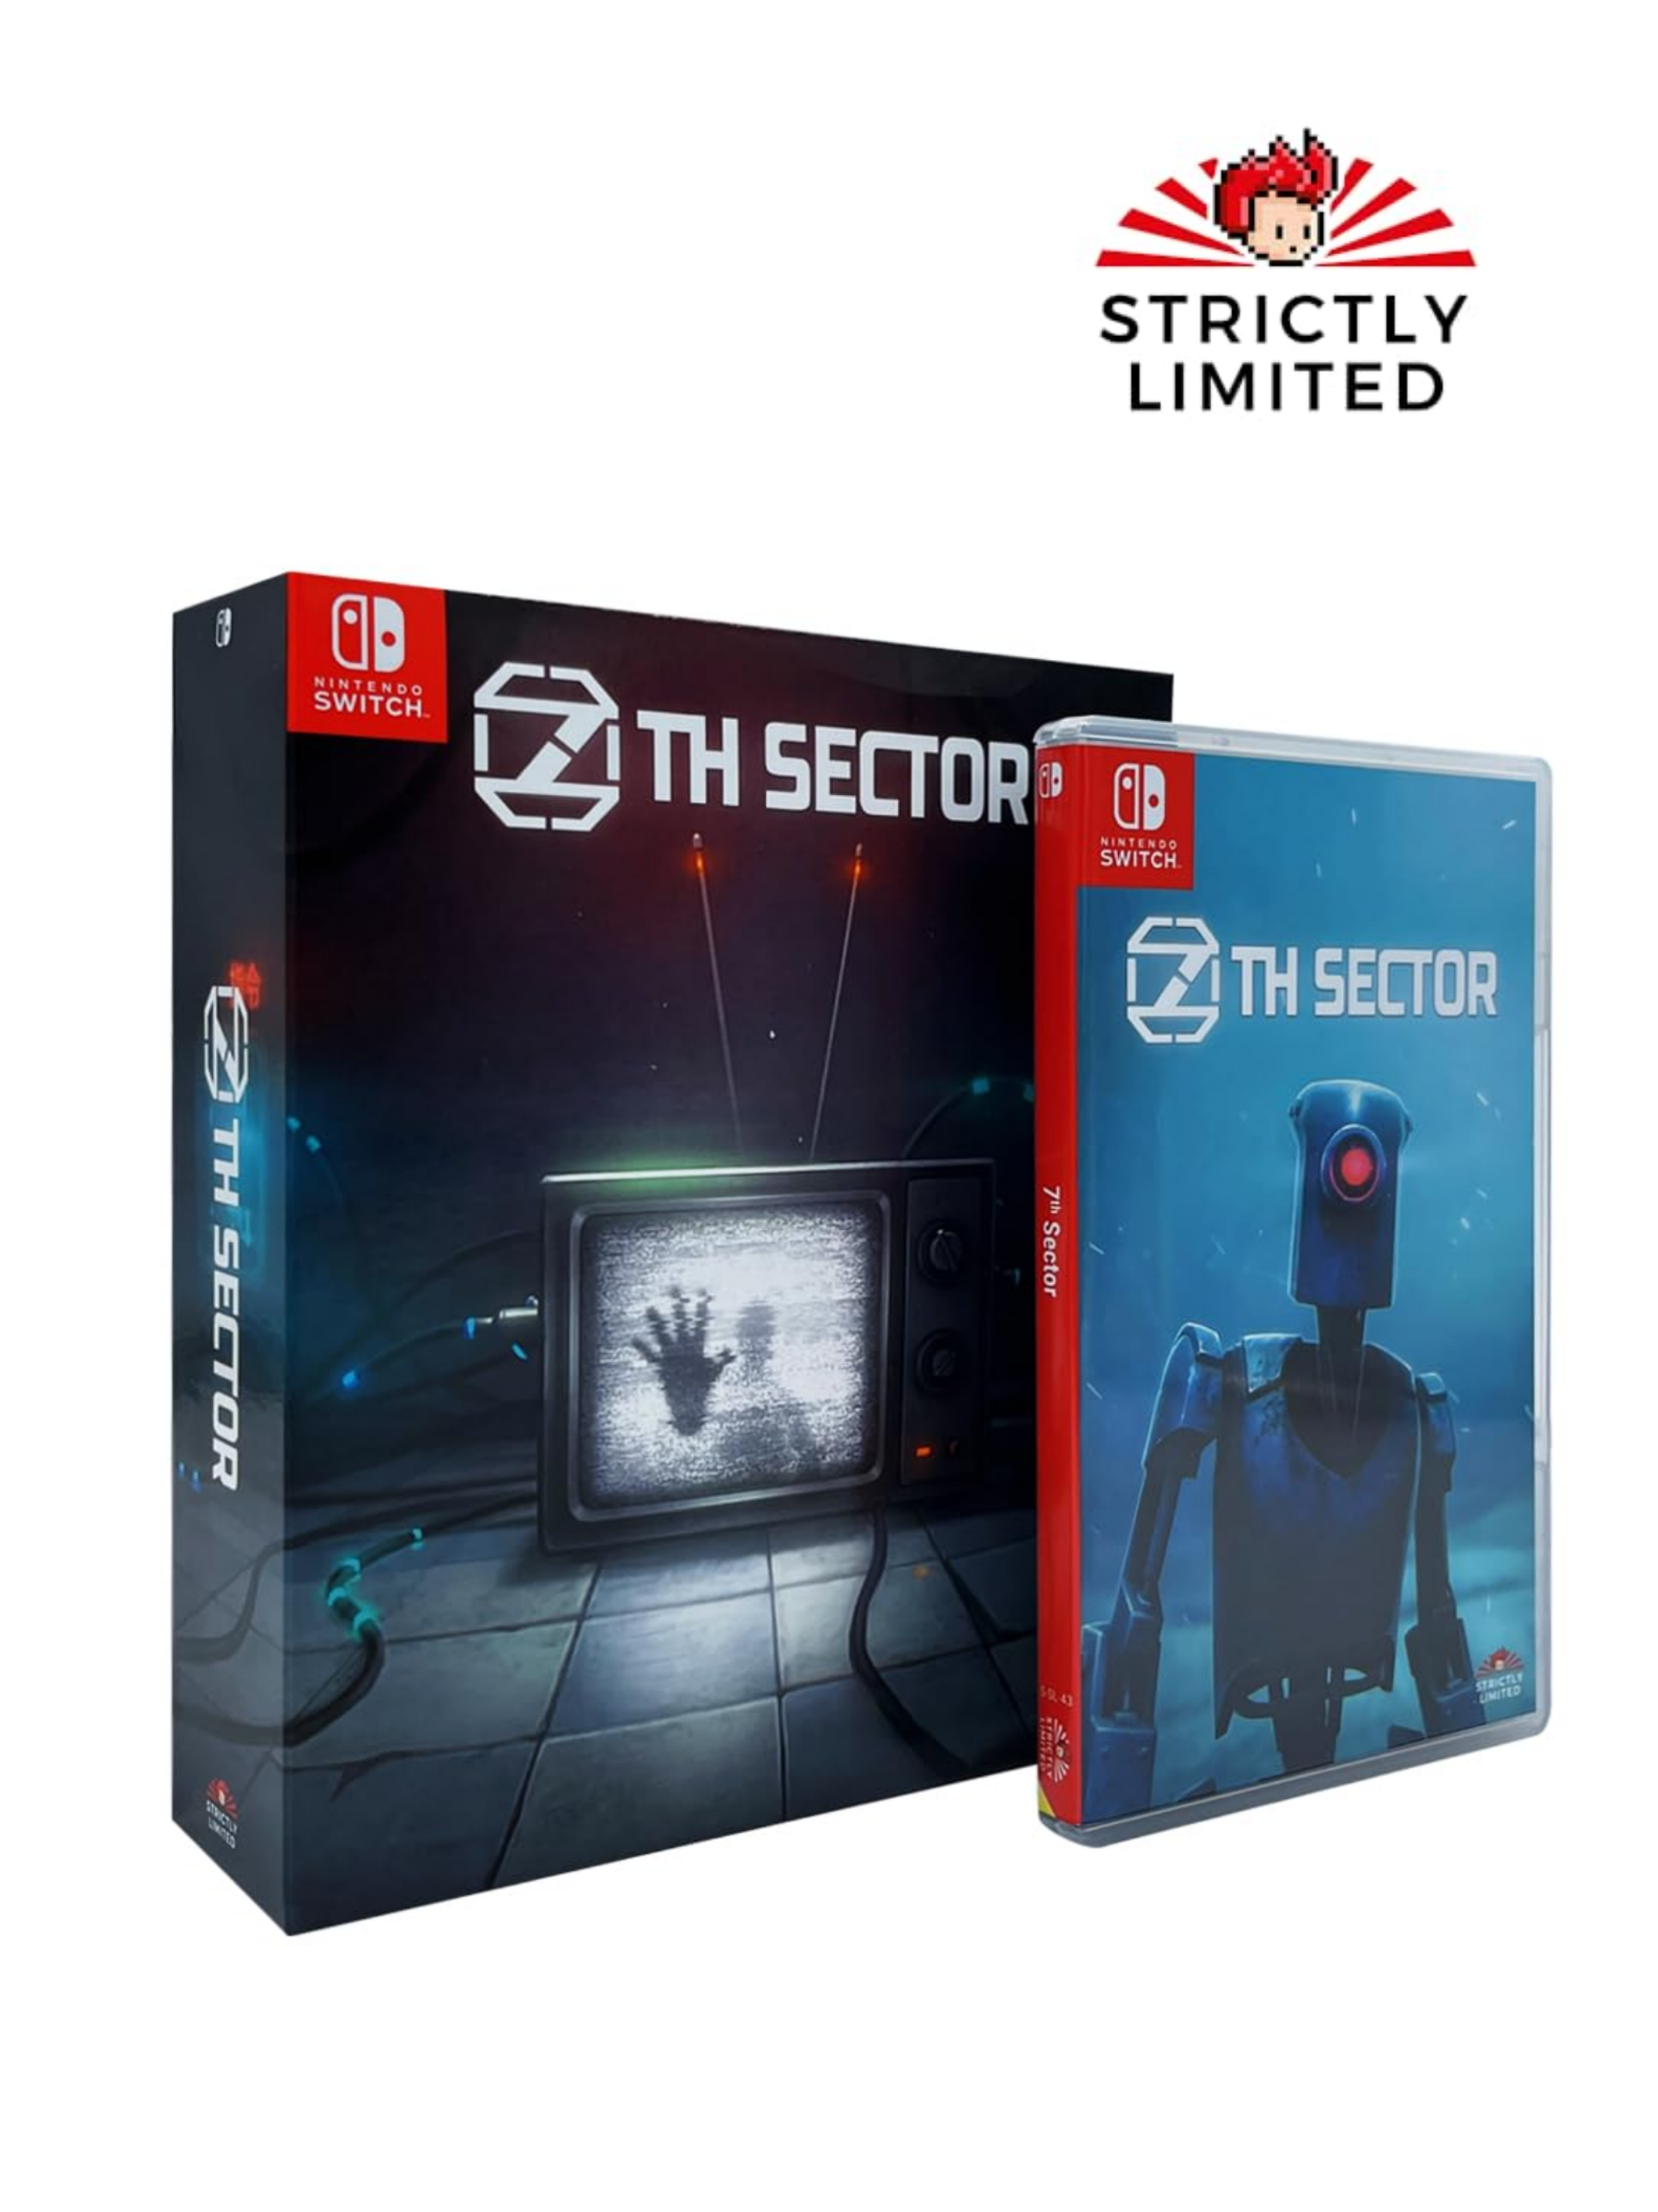 7th Sector - Special Limited Edition